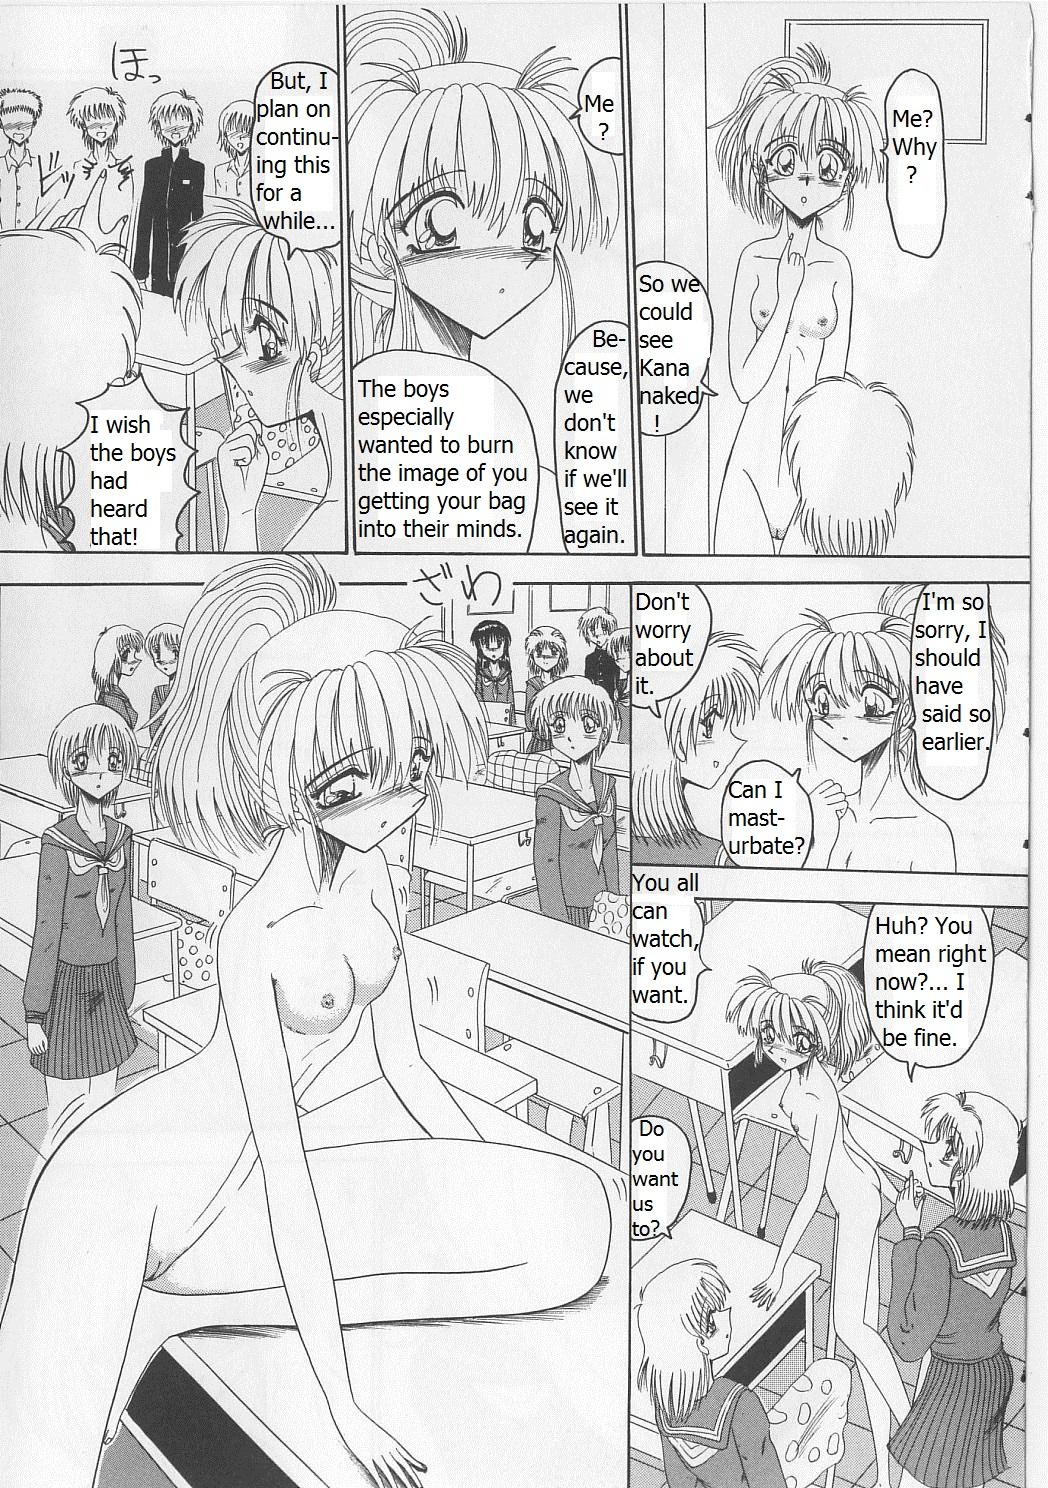 An Exhaustive Report on Masochistic Girls Ch 1 - 3 20